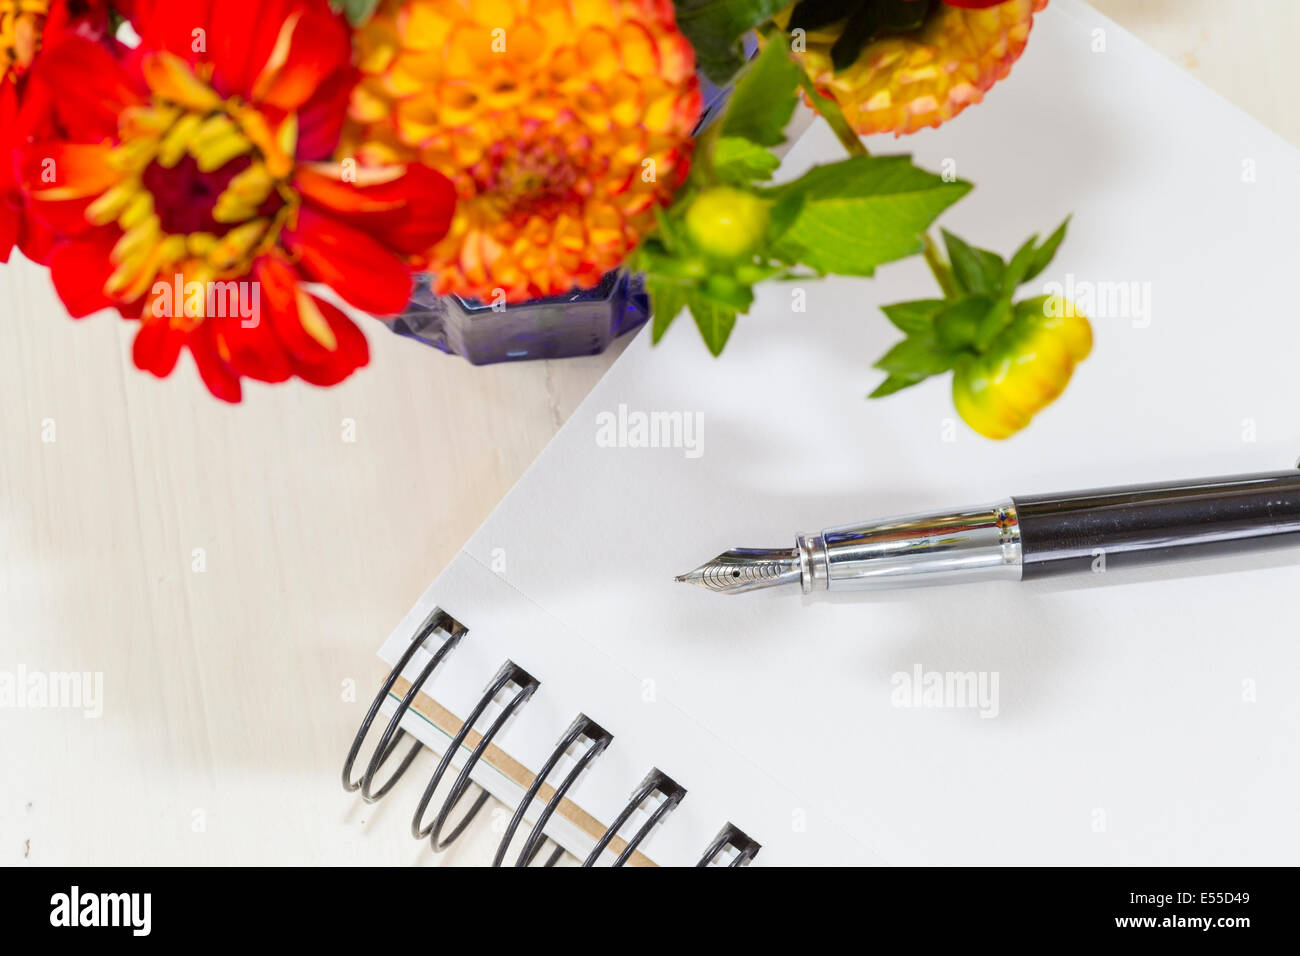 Home style fall bouquet with garden flowers alongside a notebook and fountain pen. Stock Photo